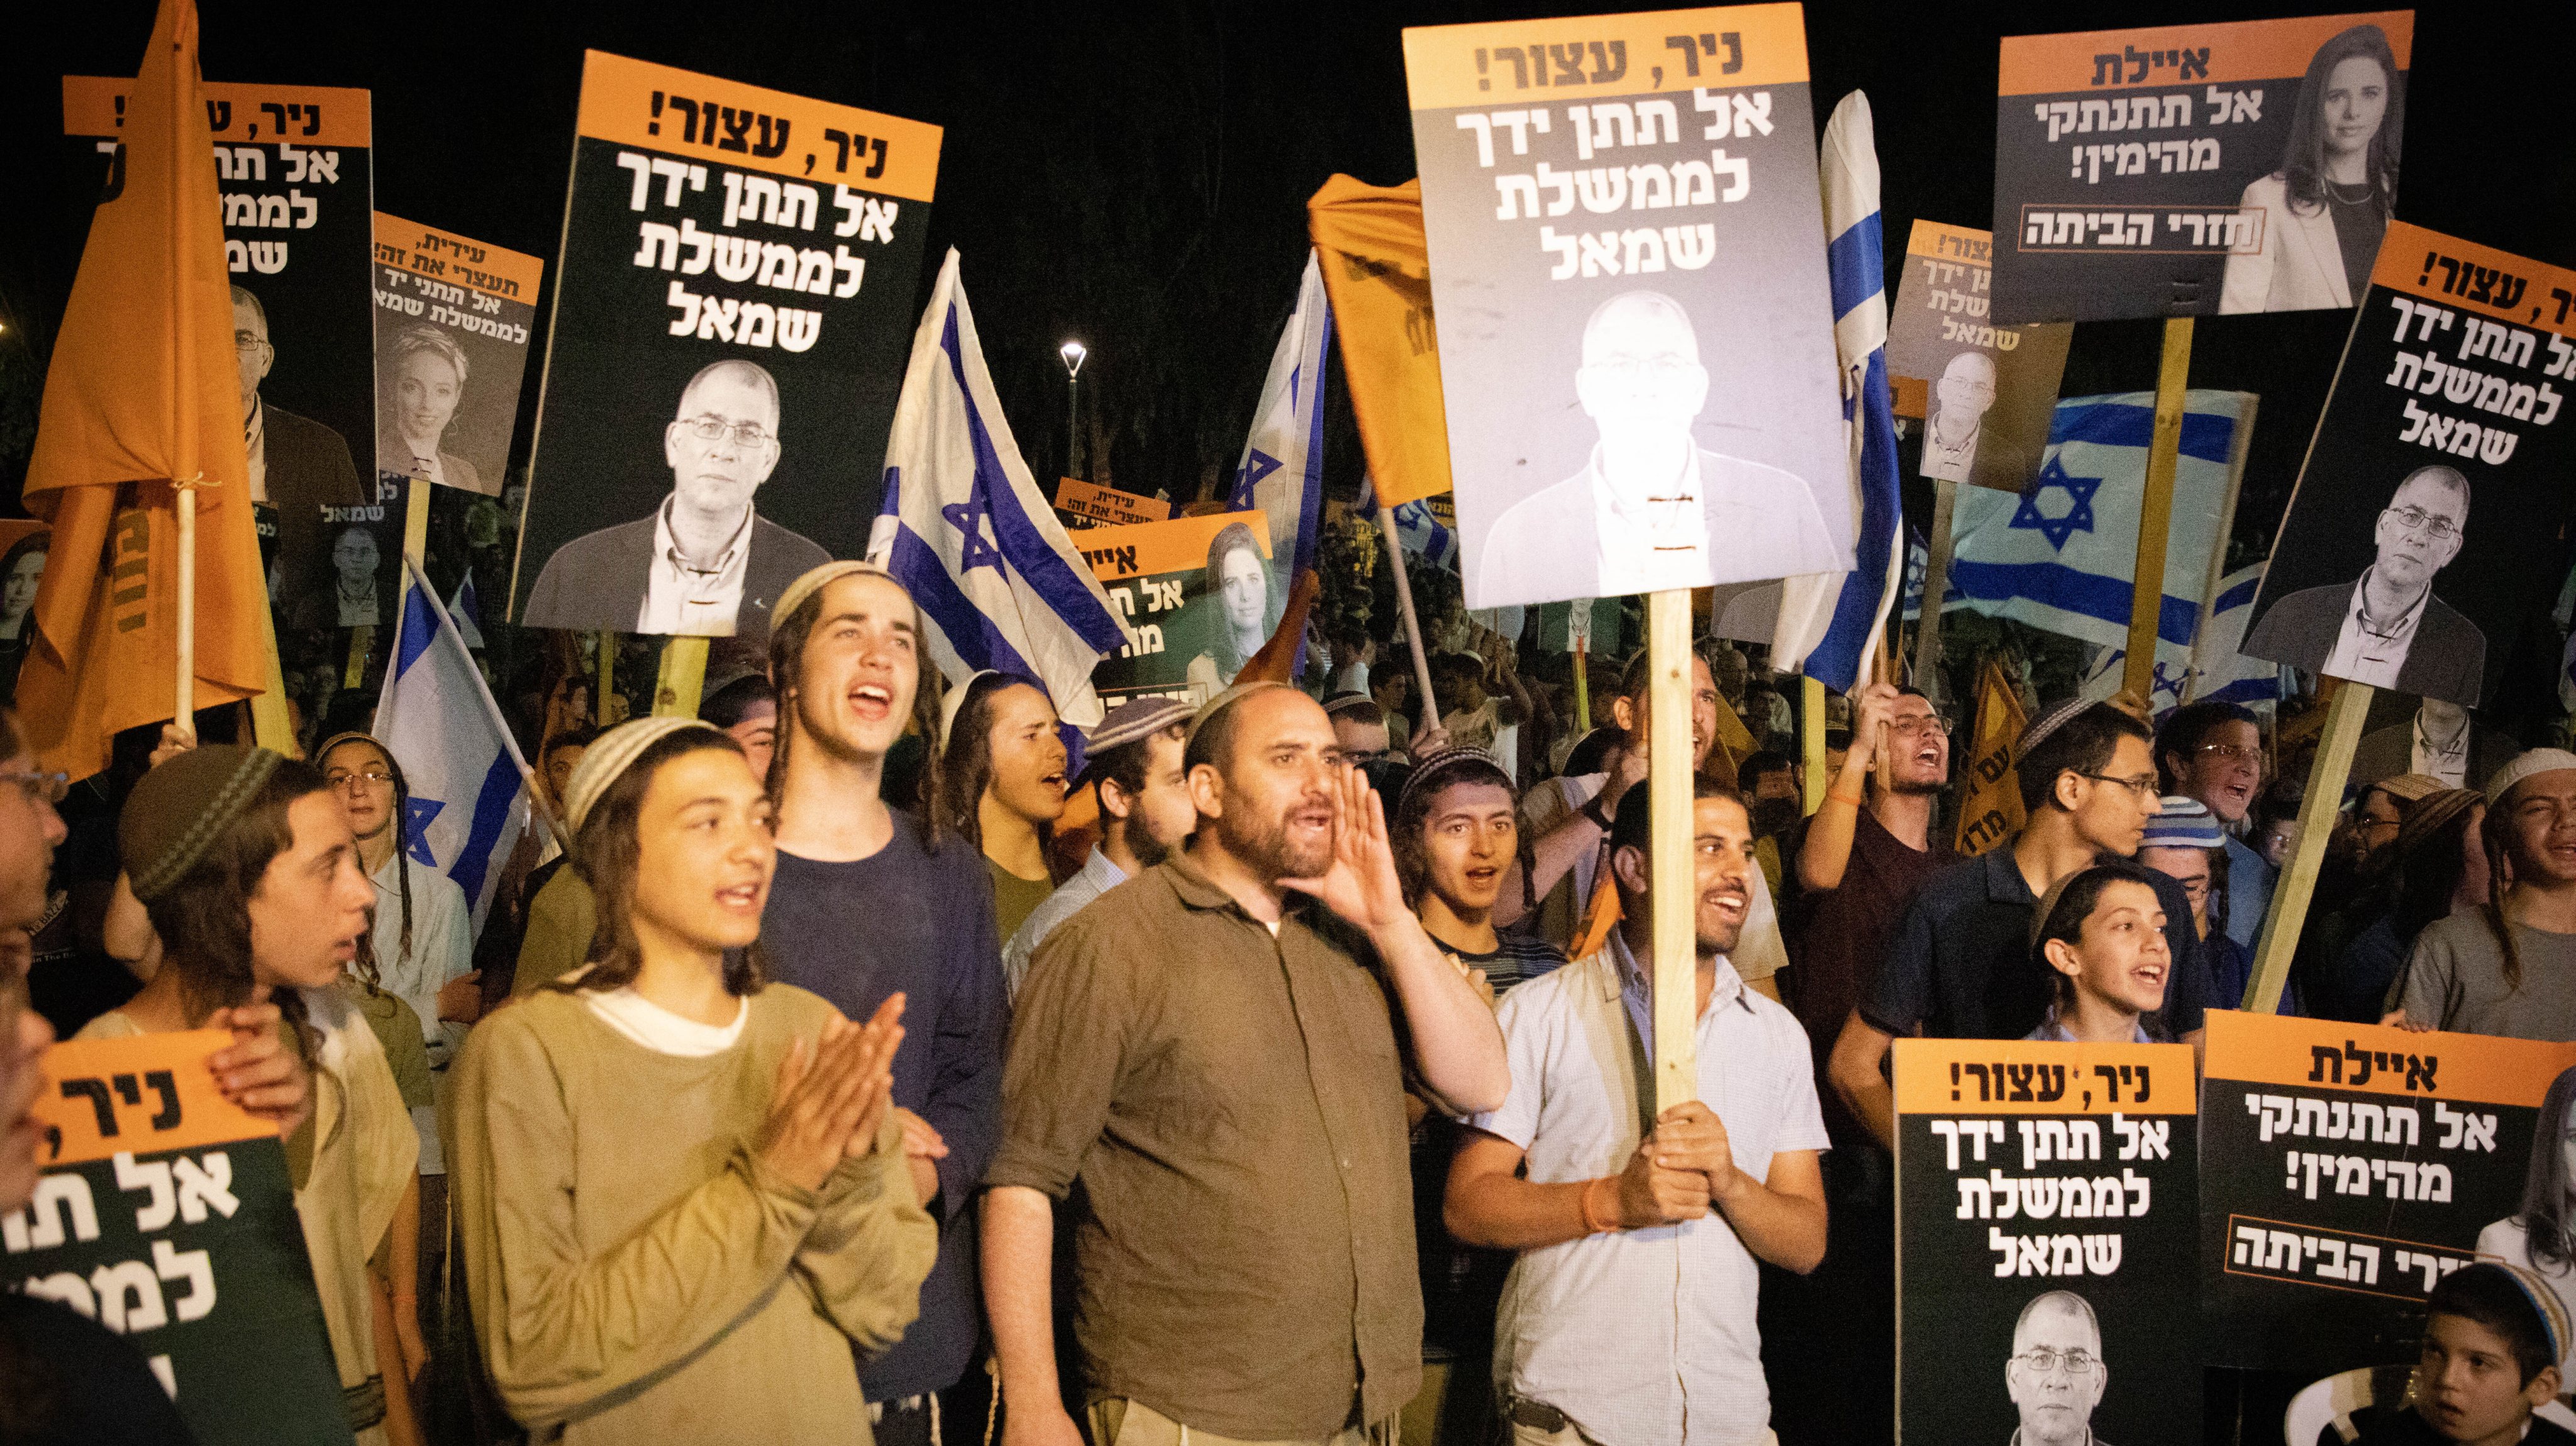 Protest of right-wing Israeli supporters of Prime Minister Benjamin Netanyahu